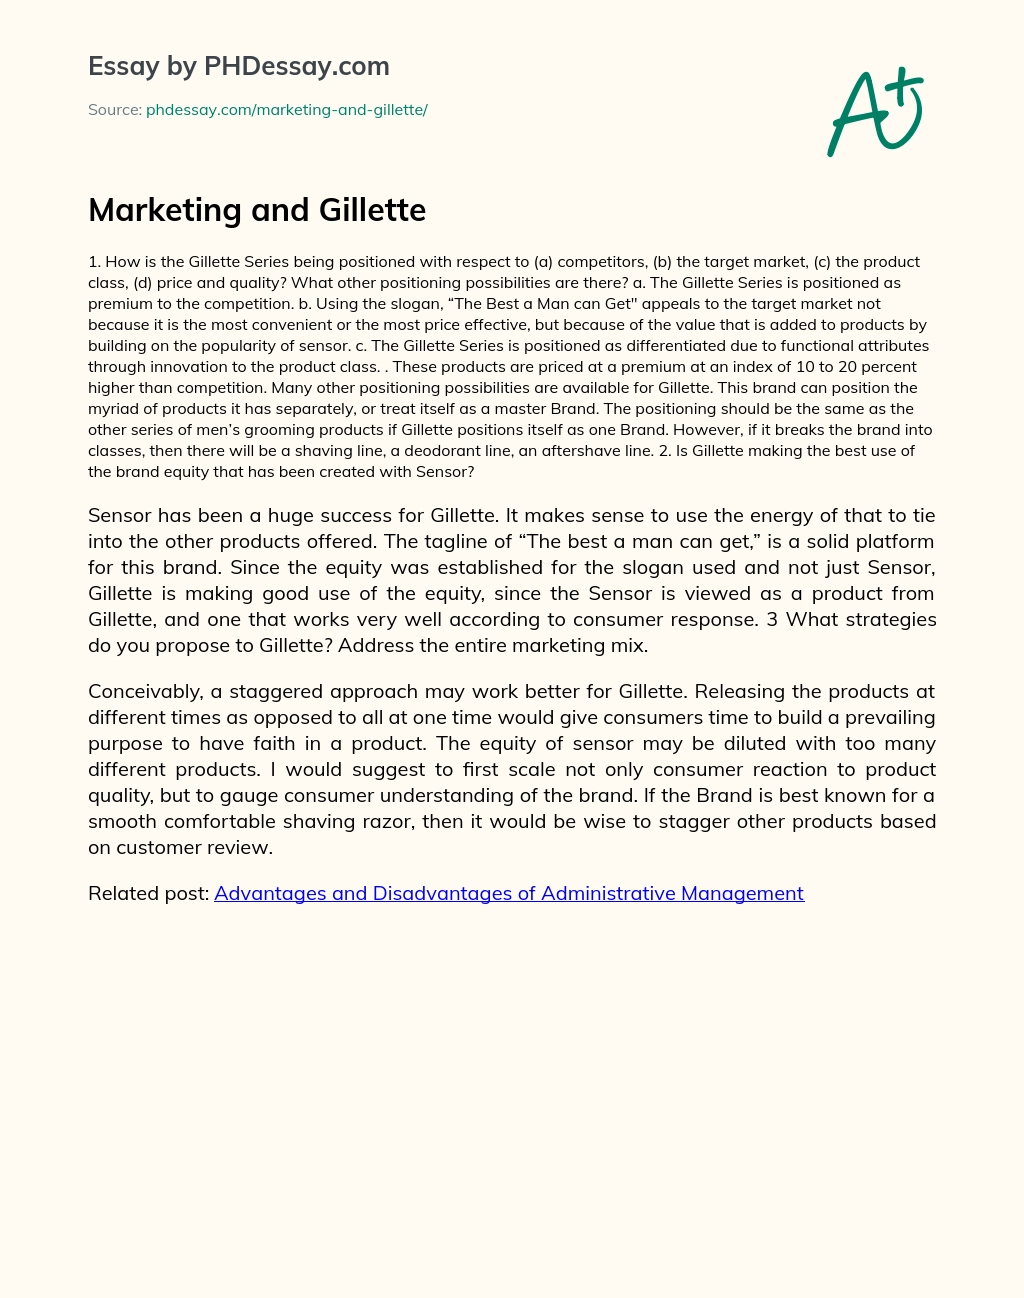 Marketing and Gillette essay